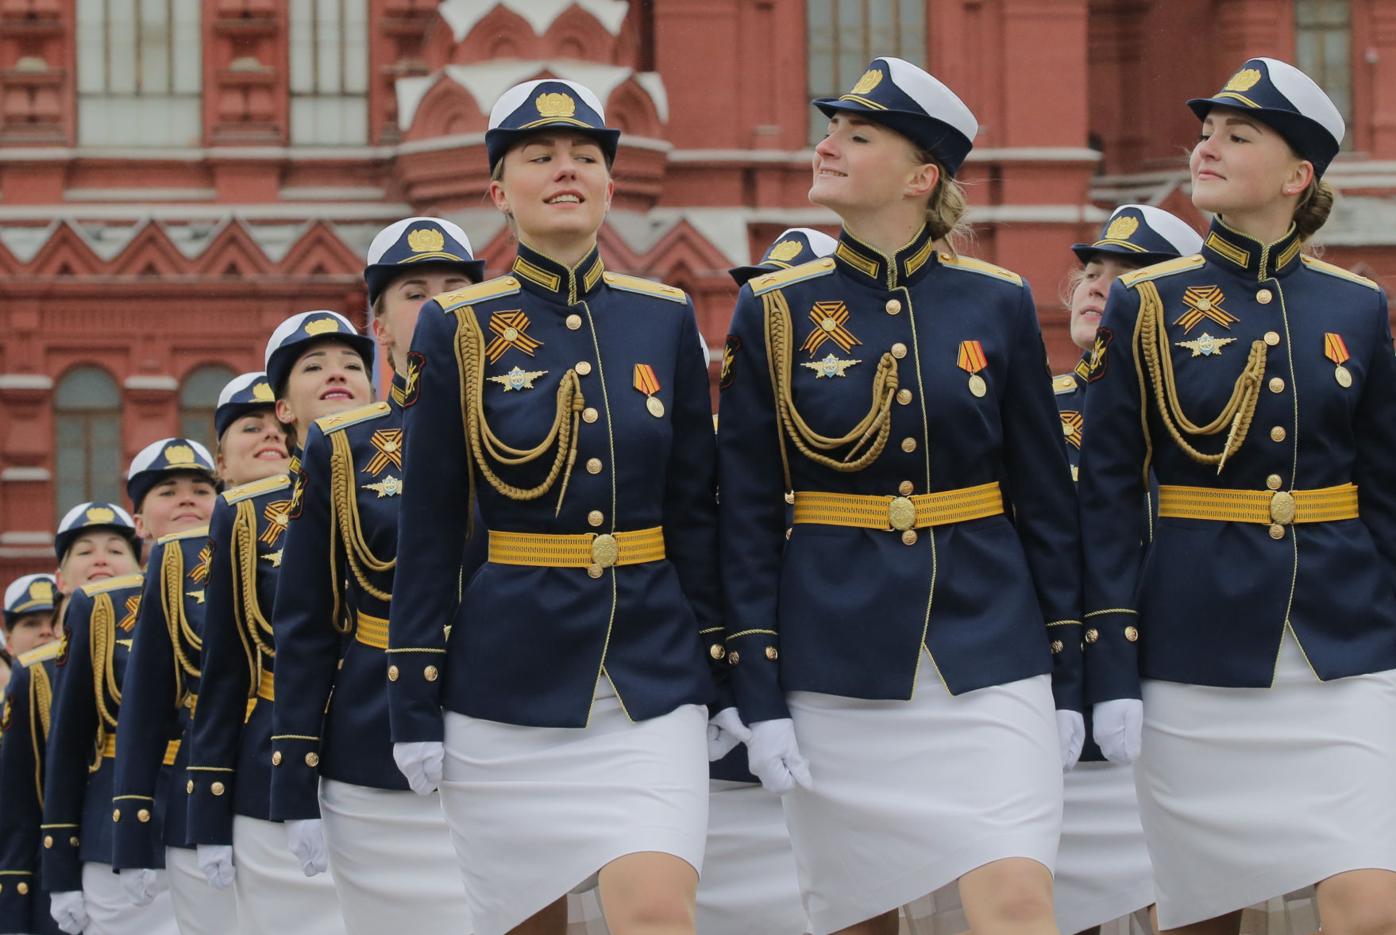 russian female soldiers military parade